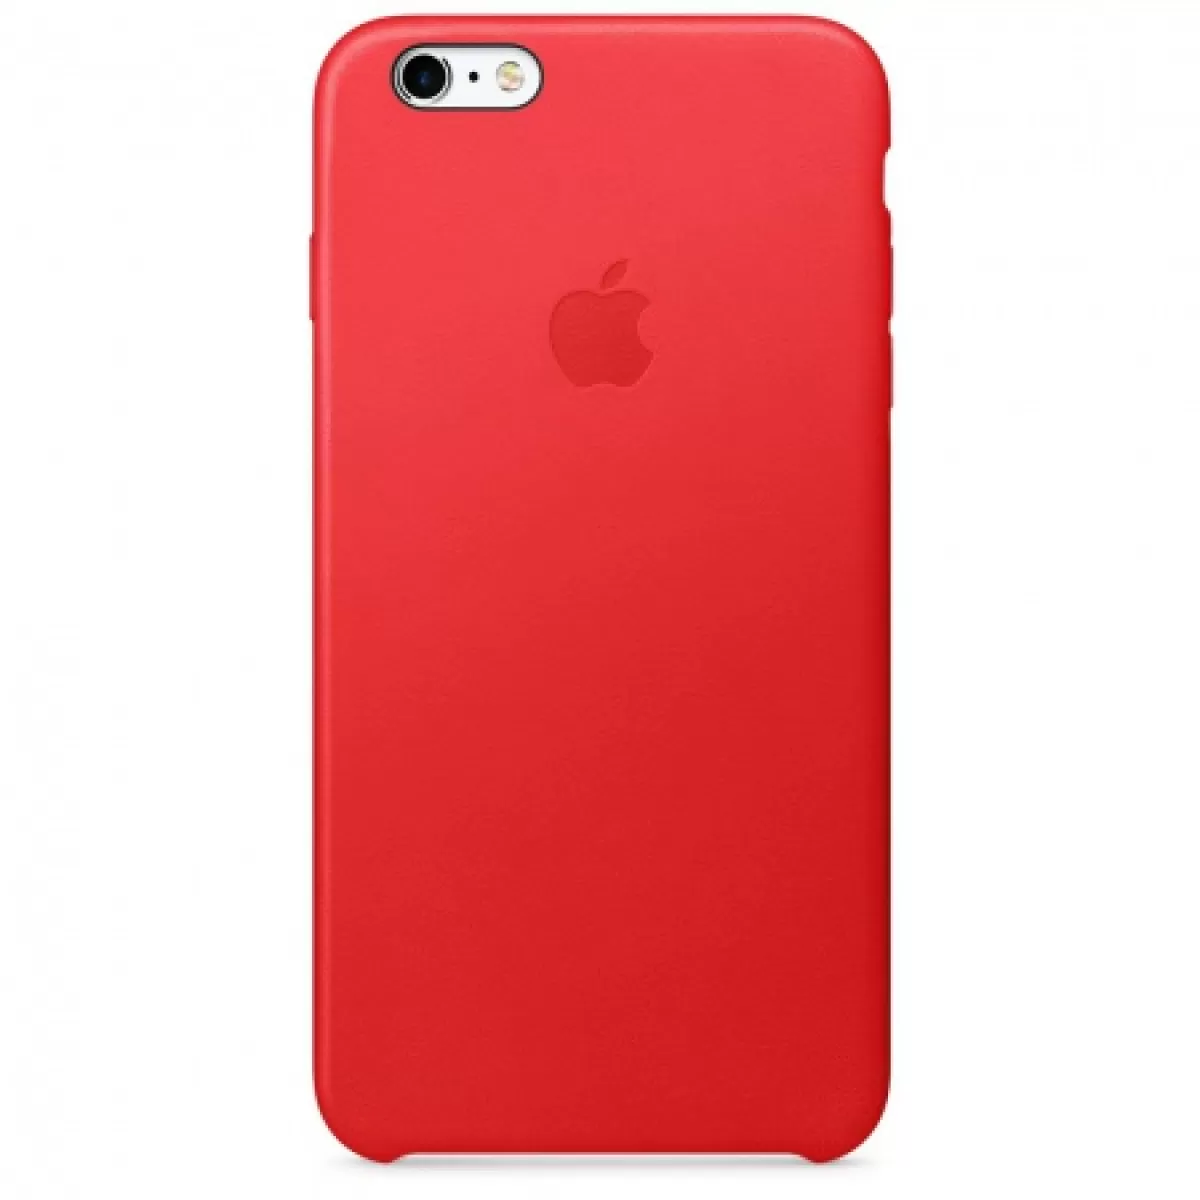 Apple iPhone 6s Plus Leather Case (PRODUCT) RED